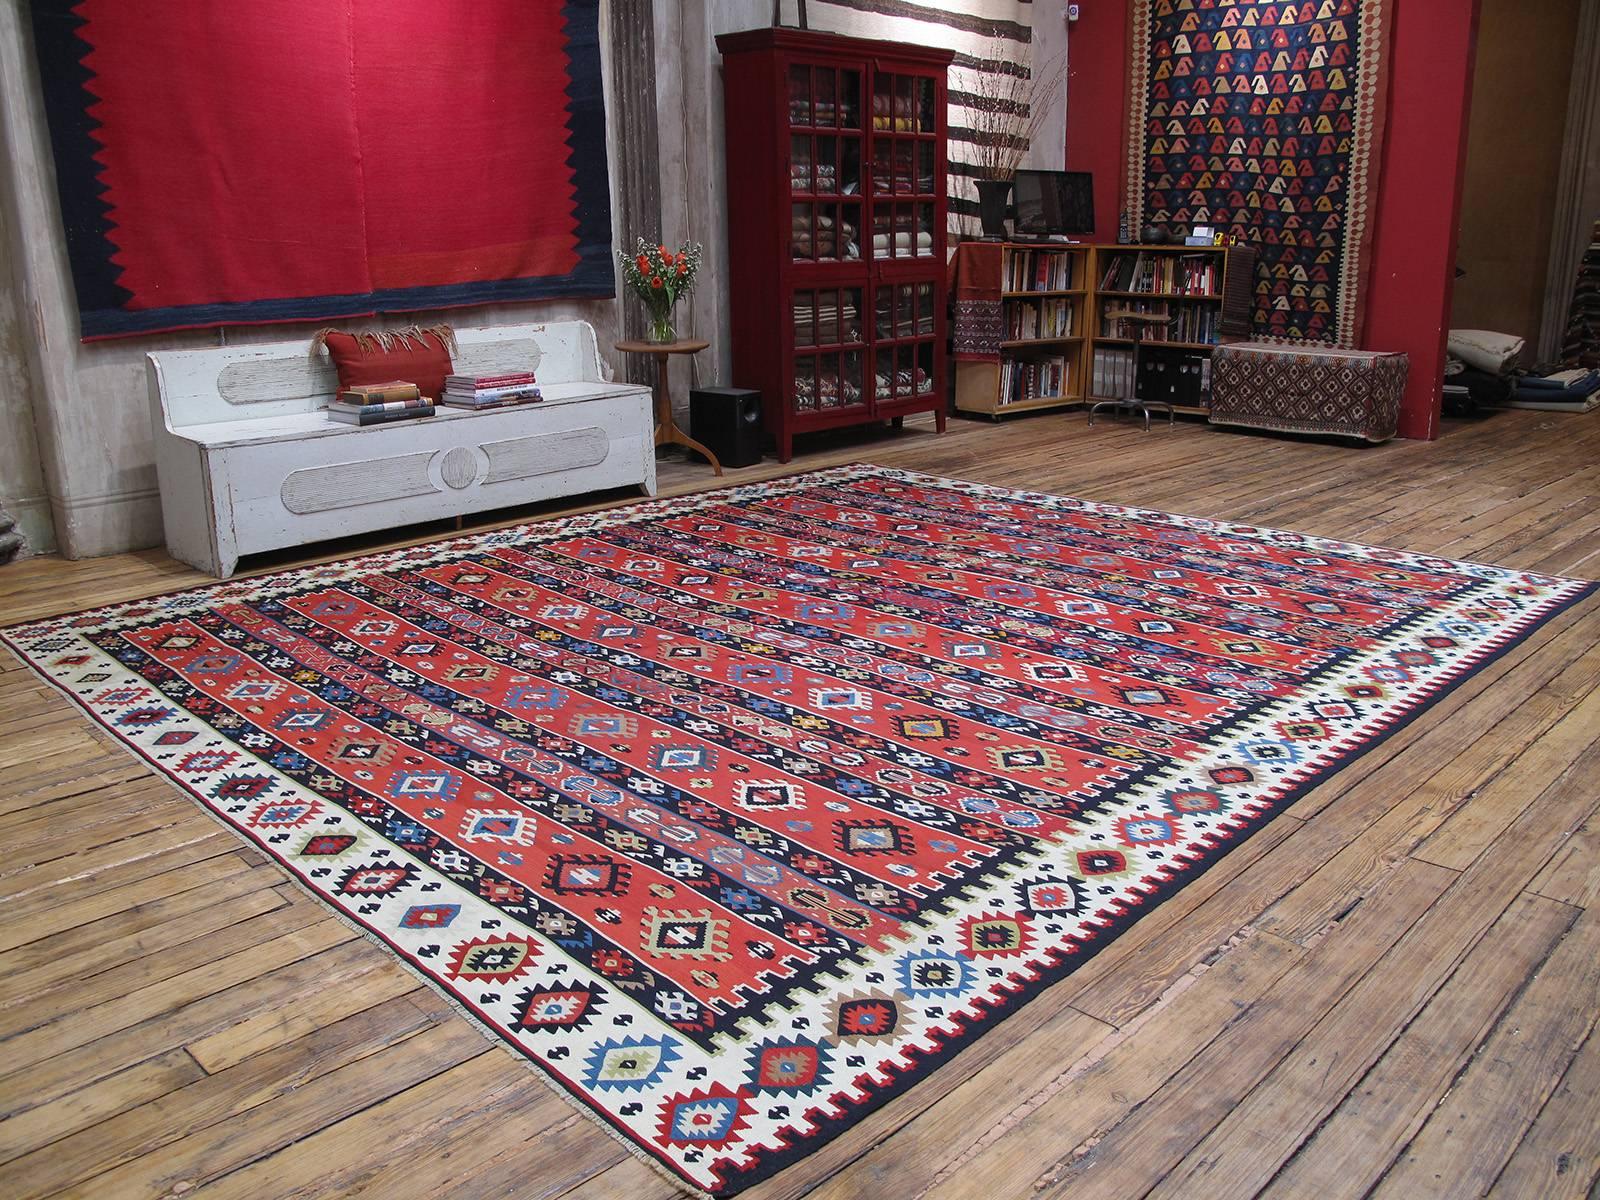 A very handsome old Kilim of large and almost square proportions from the border region between Serbia and Bulgaria, which has a centuries old tradition of Kilim weaving. Older examples from the region are called Sharkoy, the old Turkish name of the